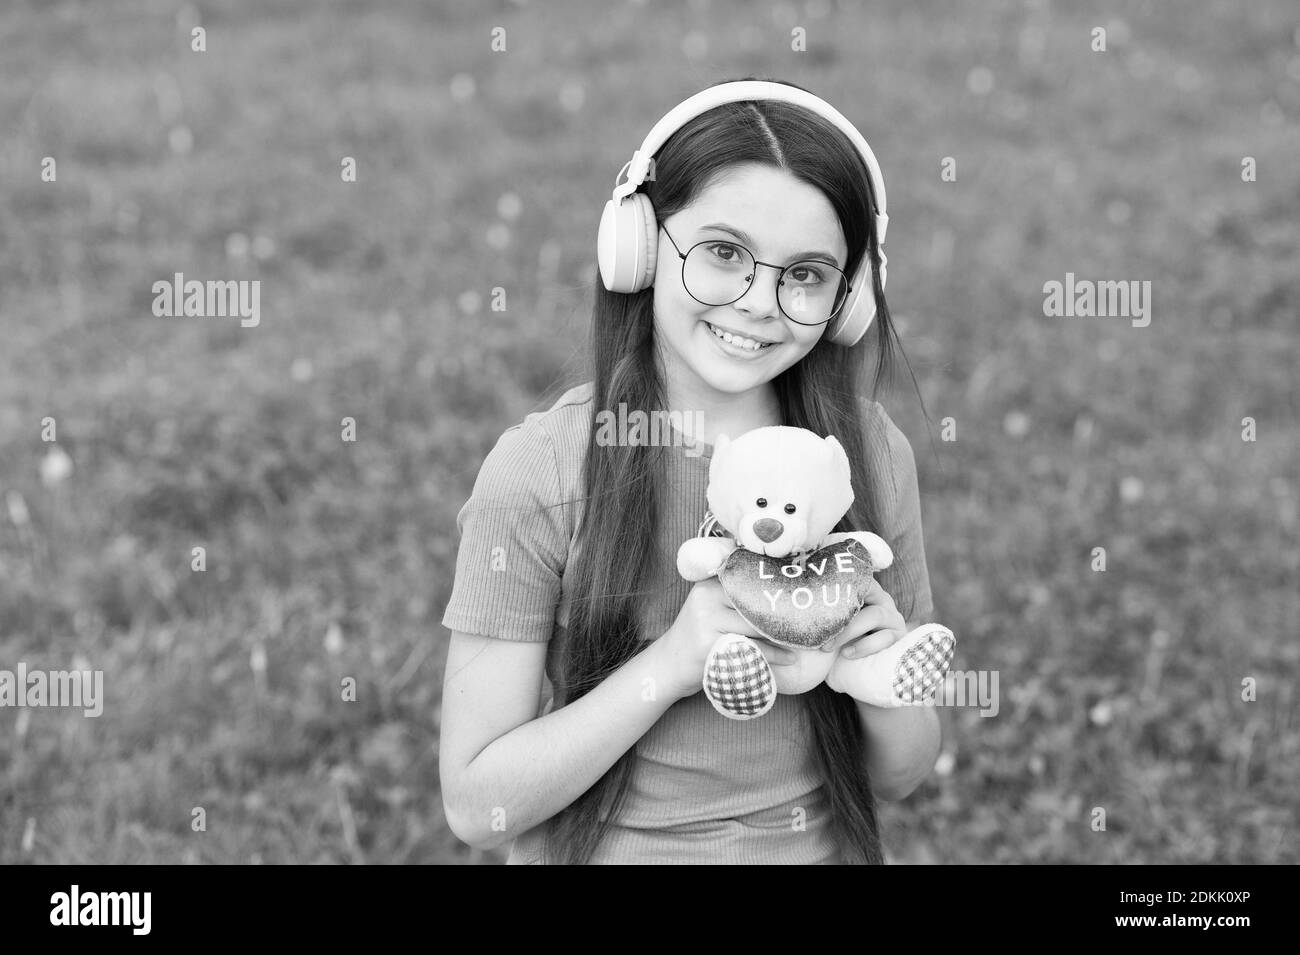 Love connection. Happy child hold teddy bear toy. Little girl play with toy outdoors. Toy store. Gift shop. Valentines present. Childhood game. Summer fun. Playtime. Adorable toy to fall in love with. Stock Photo